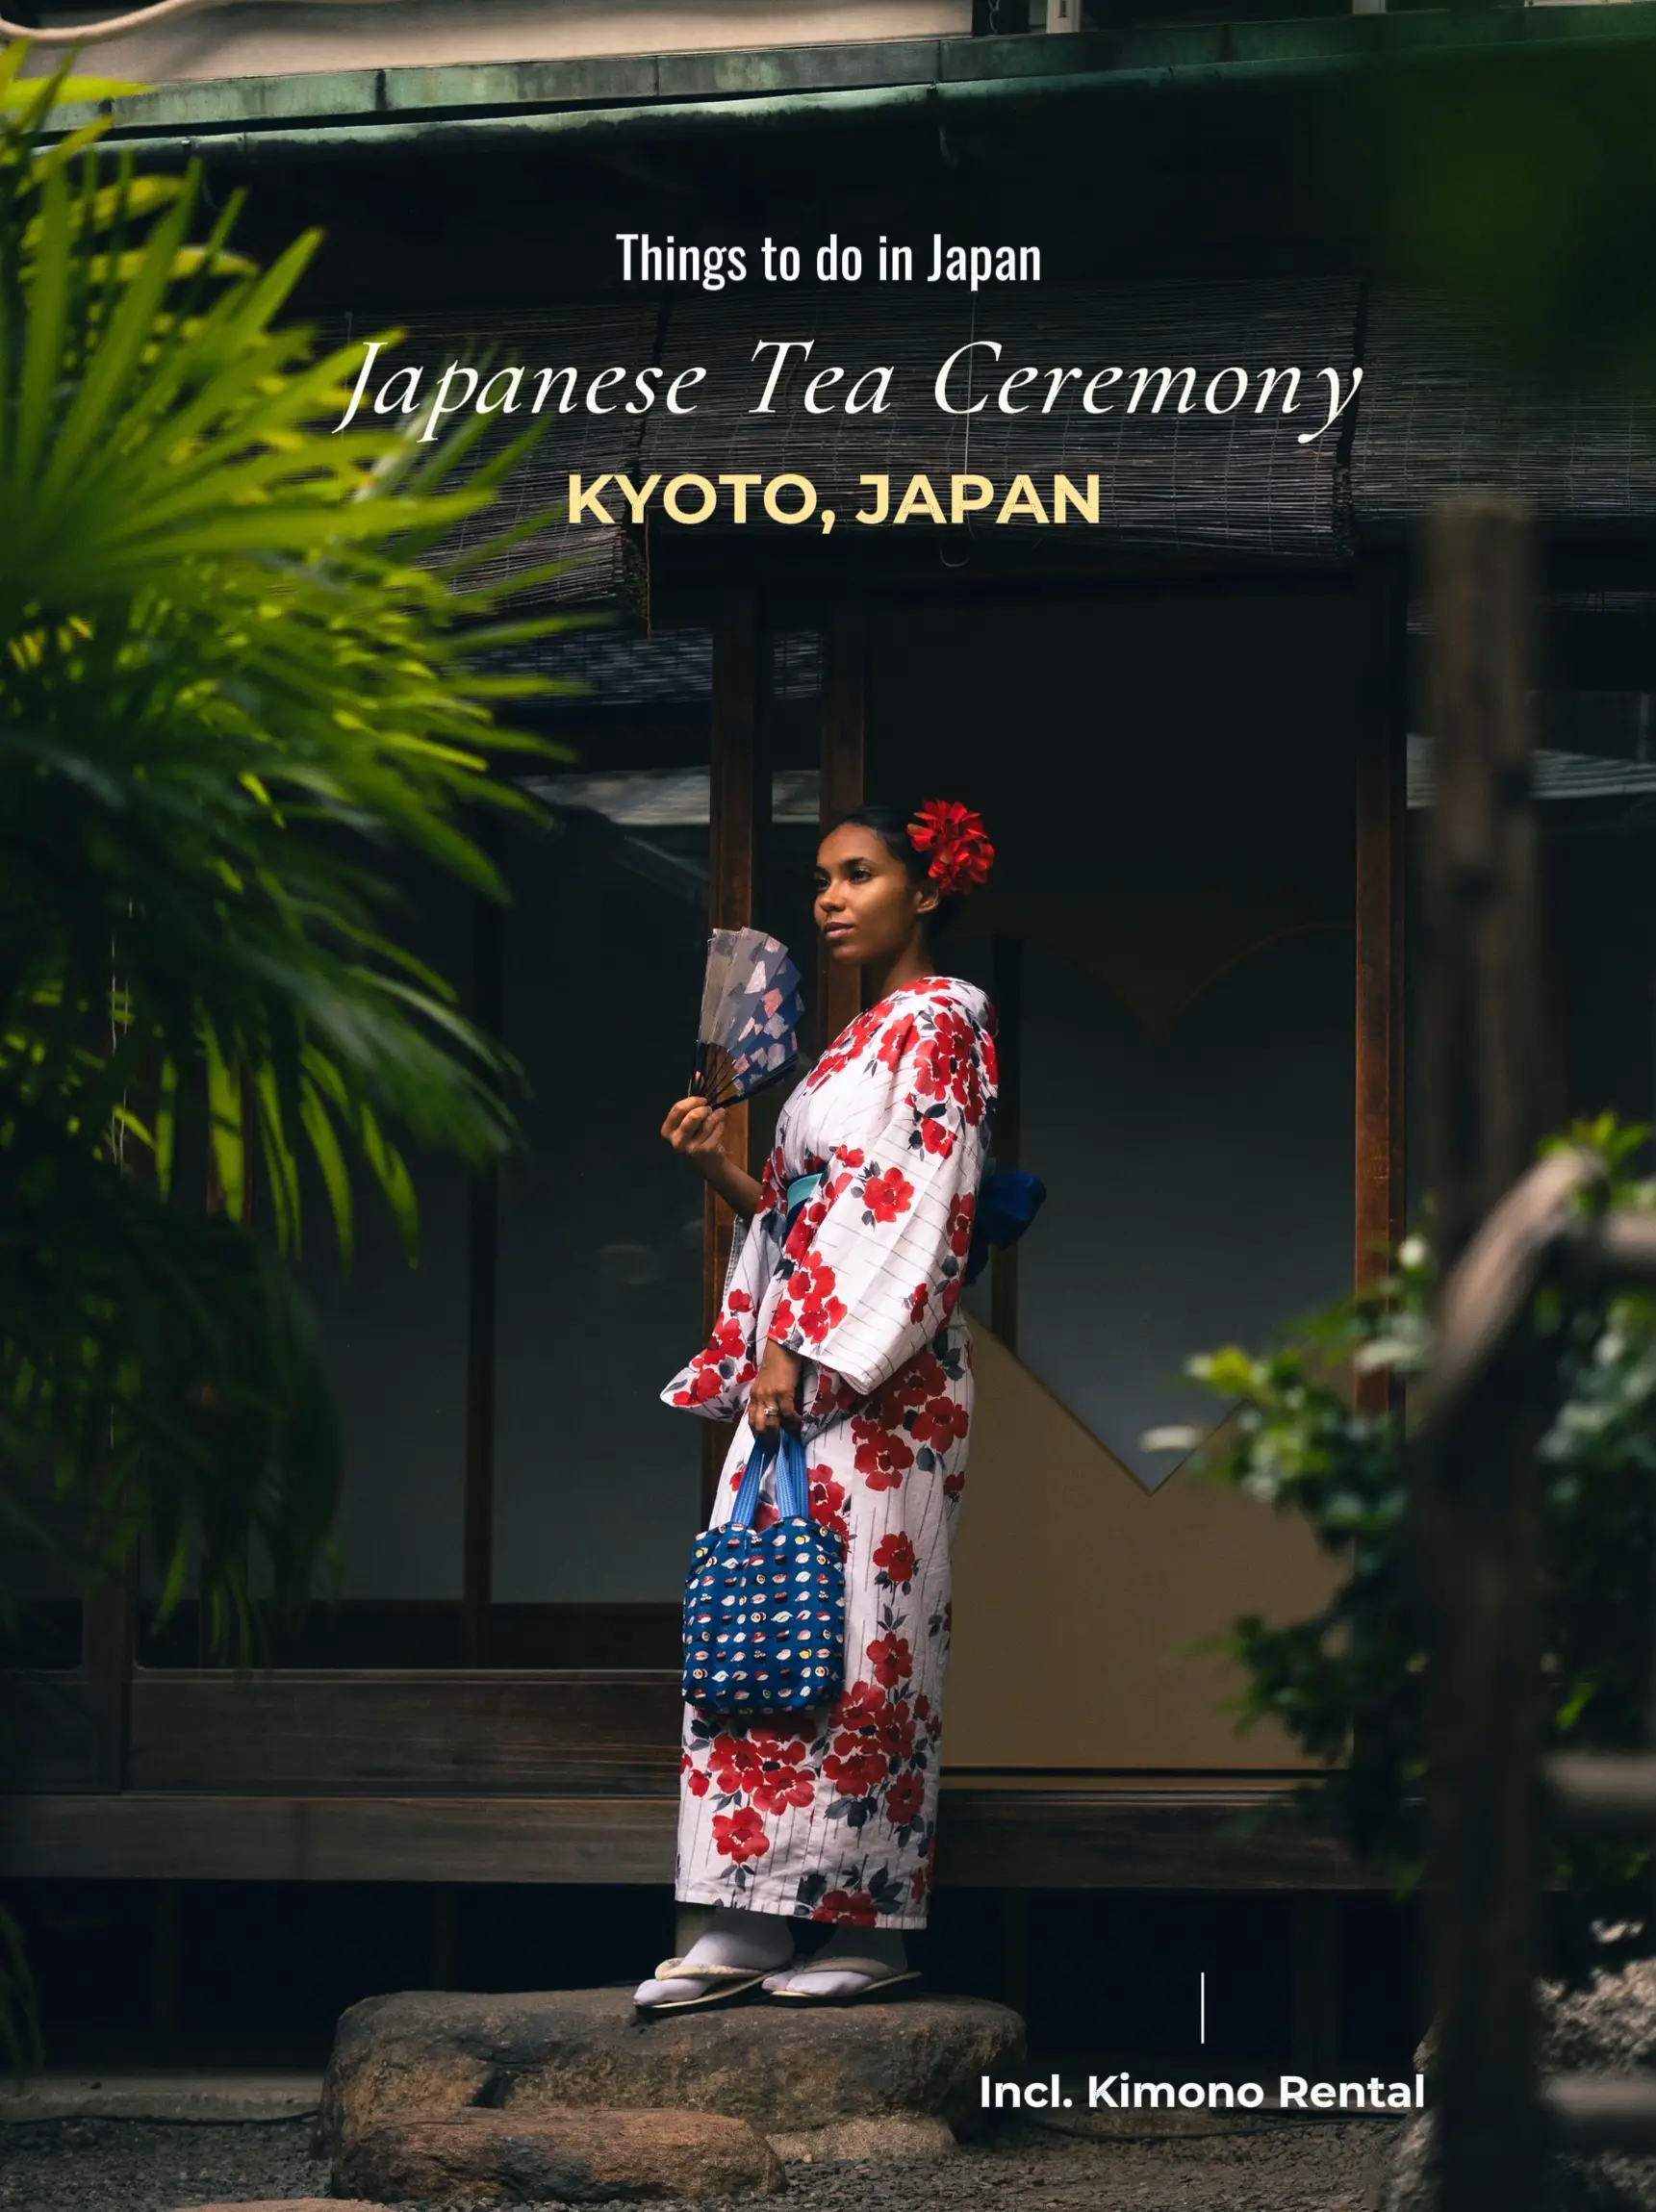 Japanese Culture and Traditions - Tea Ceremony Japan Experiences MAIKOYA